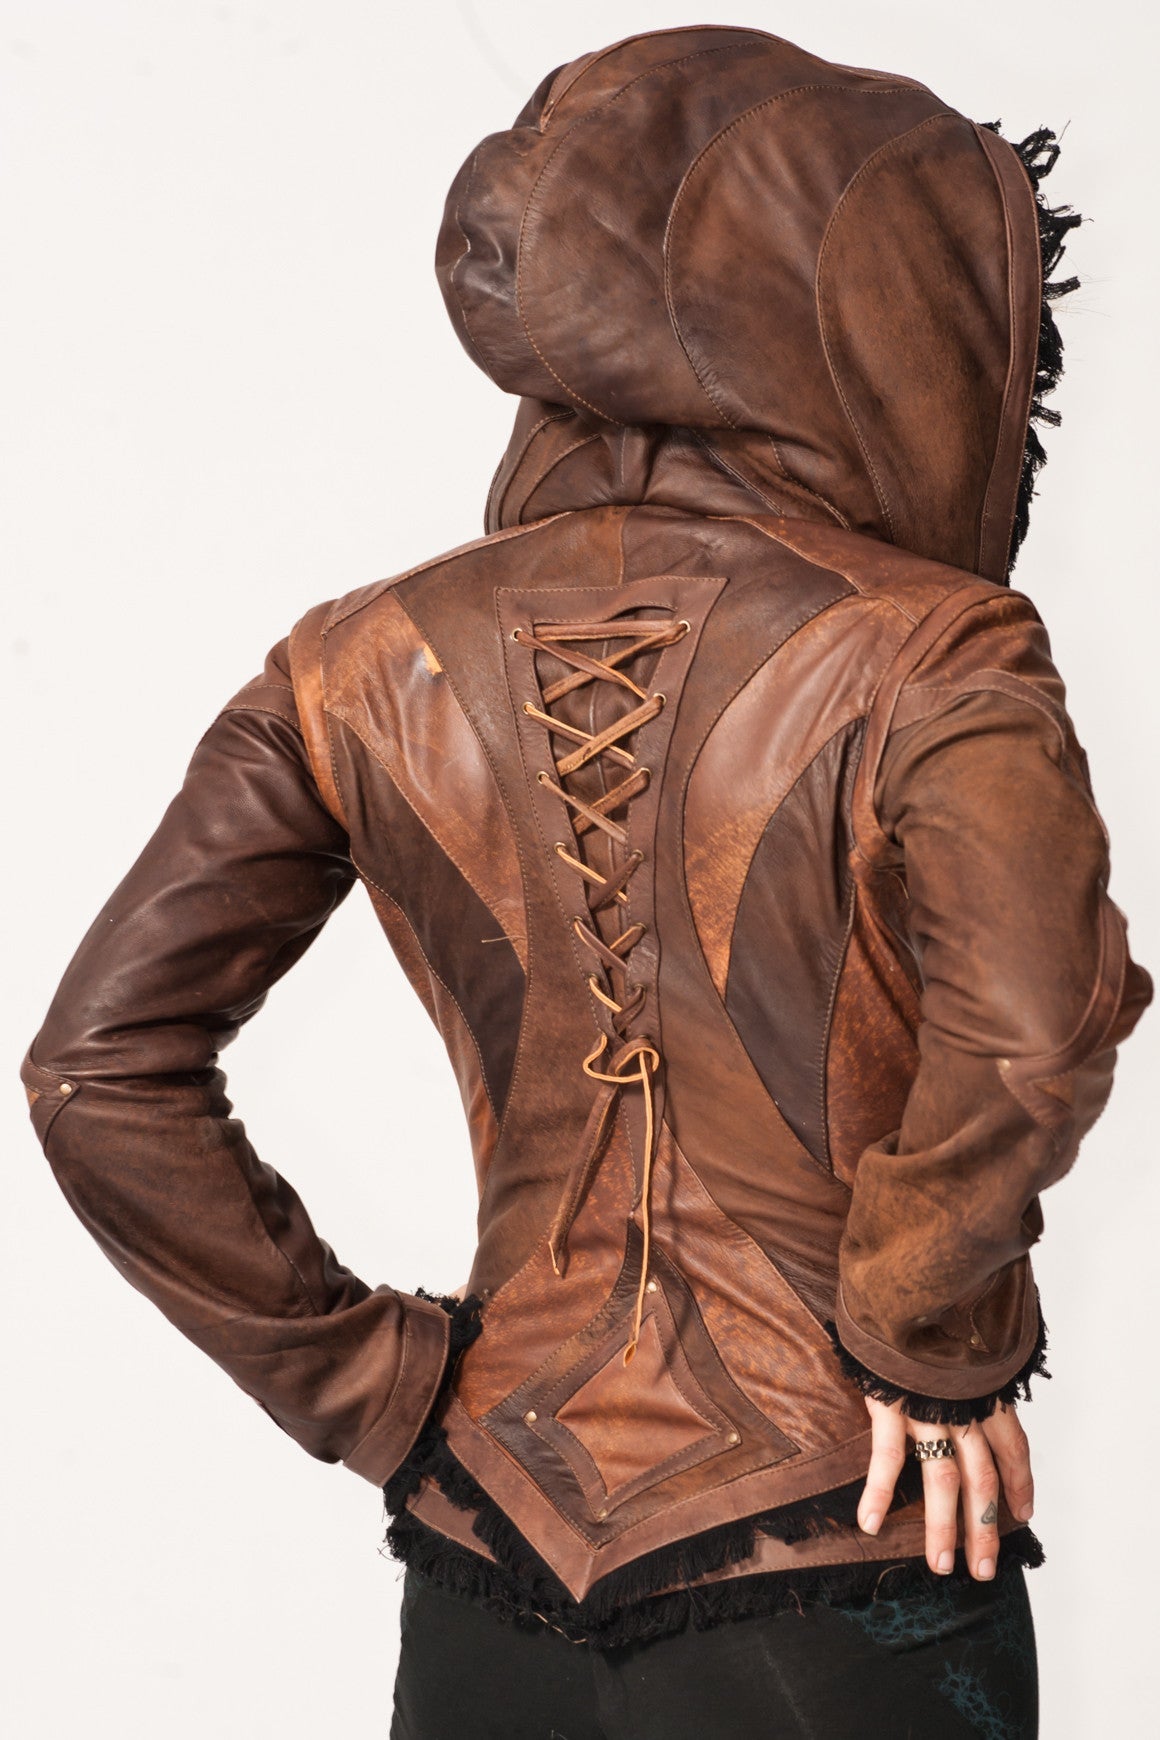 Victory leather jacket womens cut - anahata designs/infiniti now